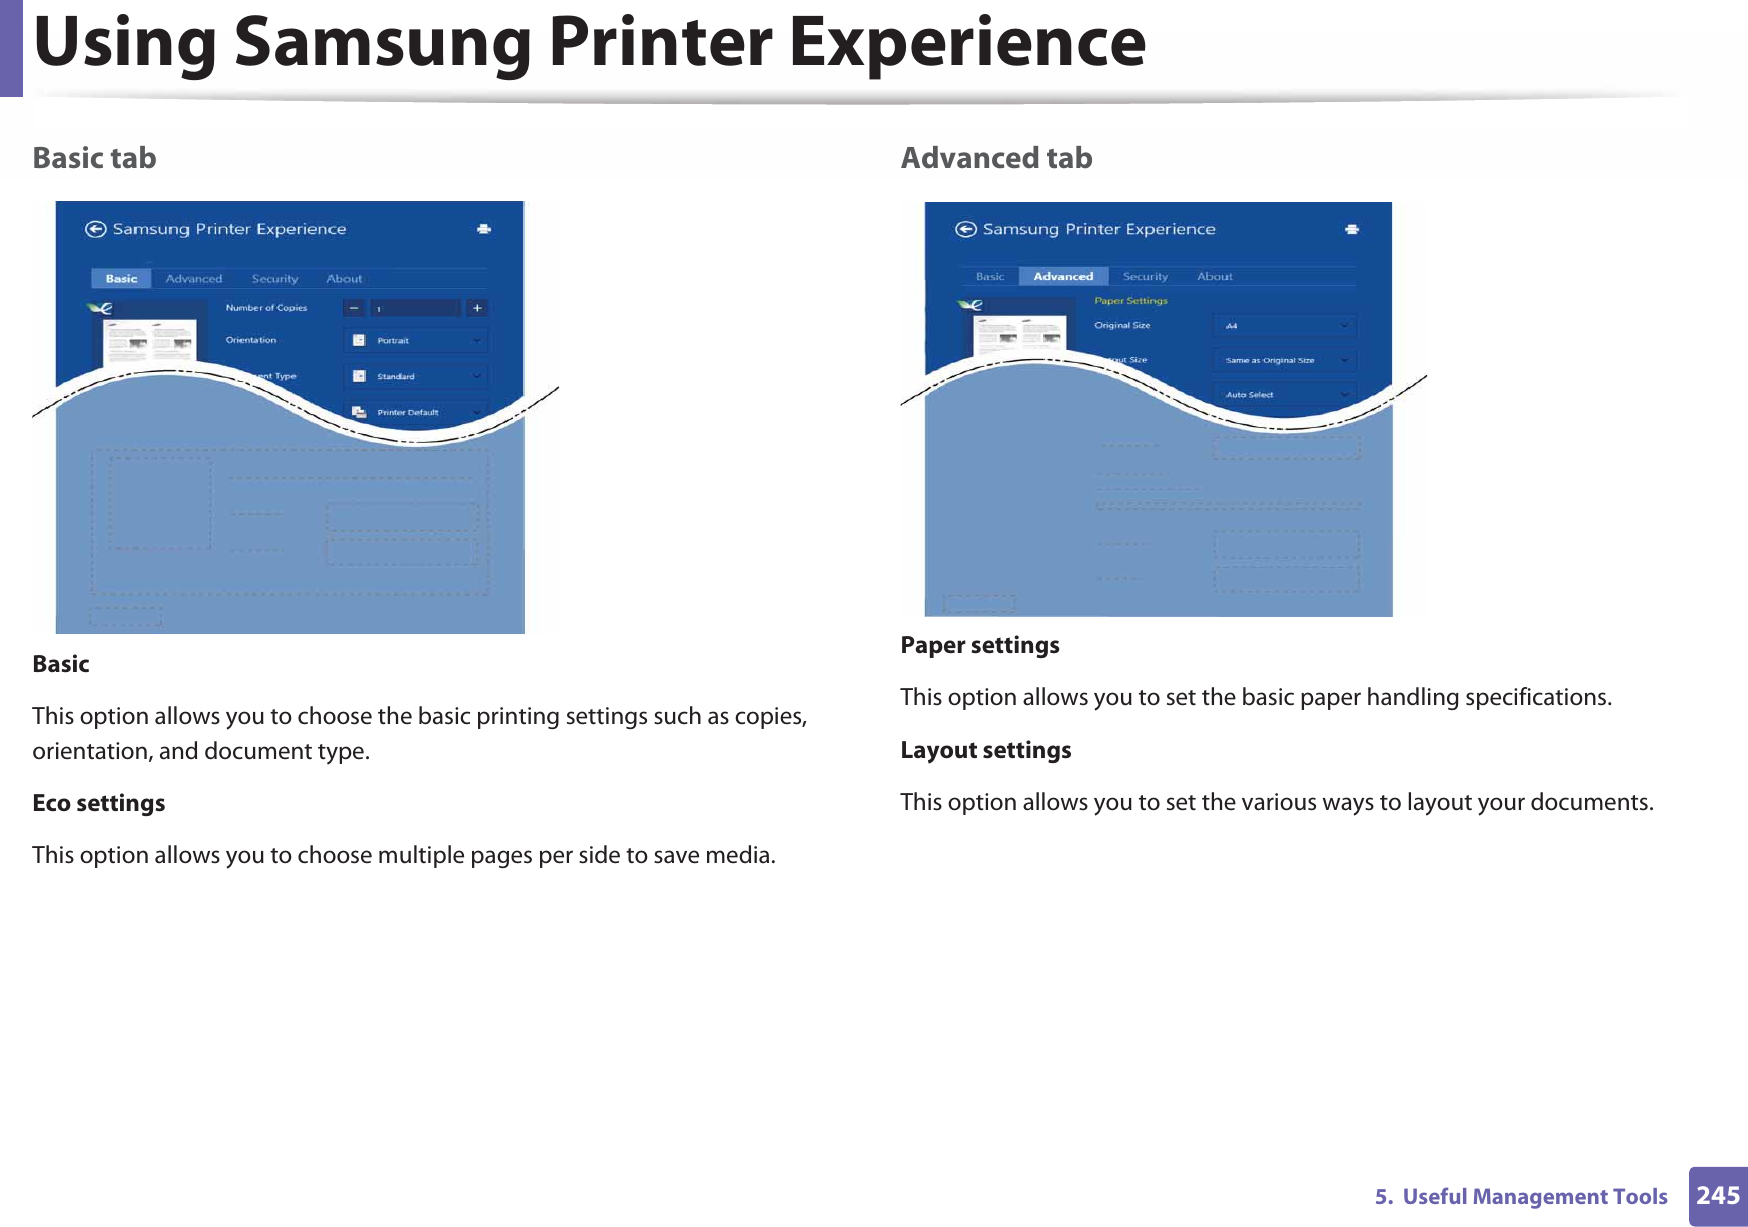 Using Samsung Printer Experience2455.  Useful Management ToolsBasic tabBasicThis option allows you to choose the basic printing settings such as copies, orientation, and document type.Eco settingsThis option allows you to choose multiple pages per side to save media.Advanced tabPaper settingsThis option allows you to set the basic paper handling specifications.Layout settingsThis option allows you to set the various ways to layout your documents.